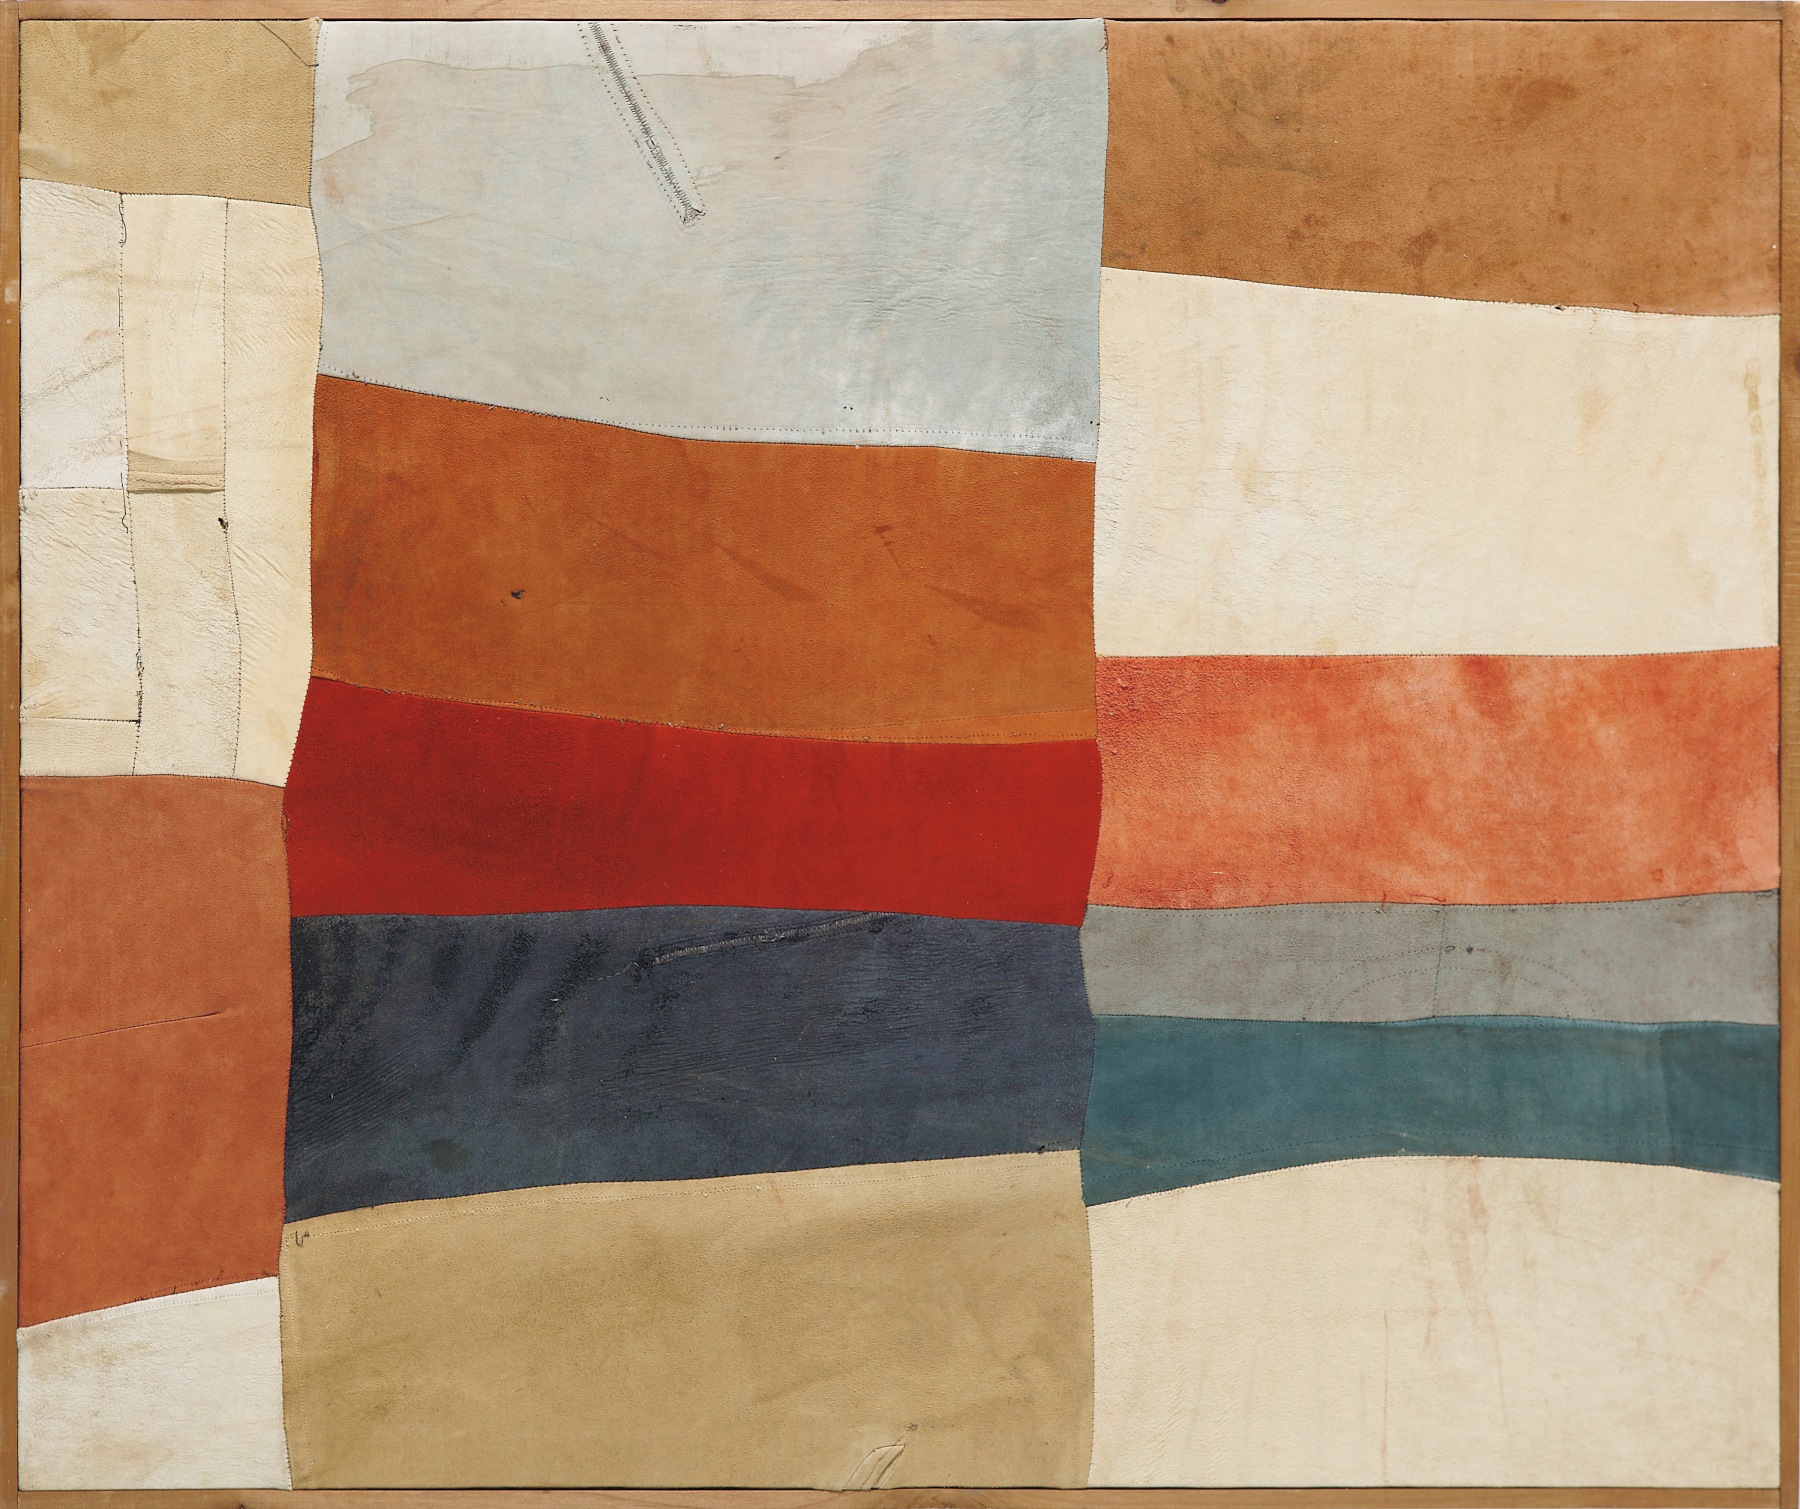 Nuvolo (Giorgio Ascani). Untitled. 1961. Dyed and sewn deerskin, 83 by 100 cm (32⅝ by 39⅜ in.)